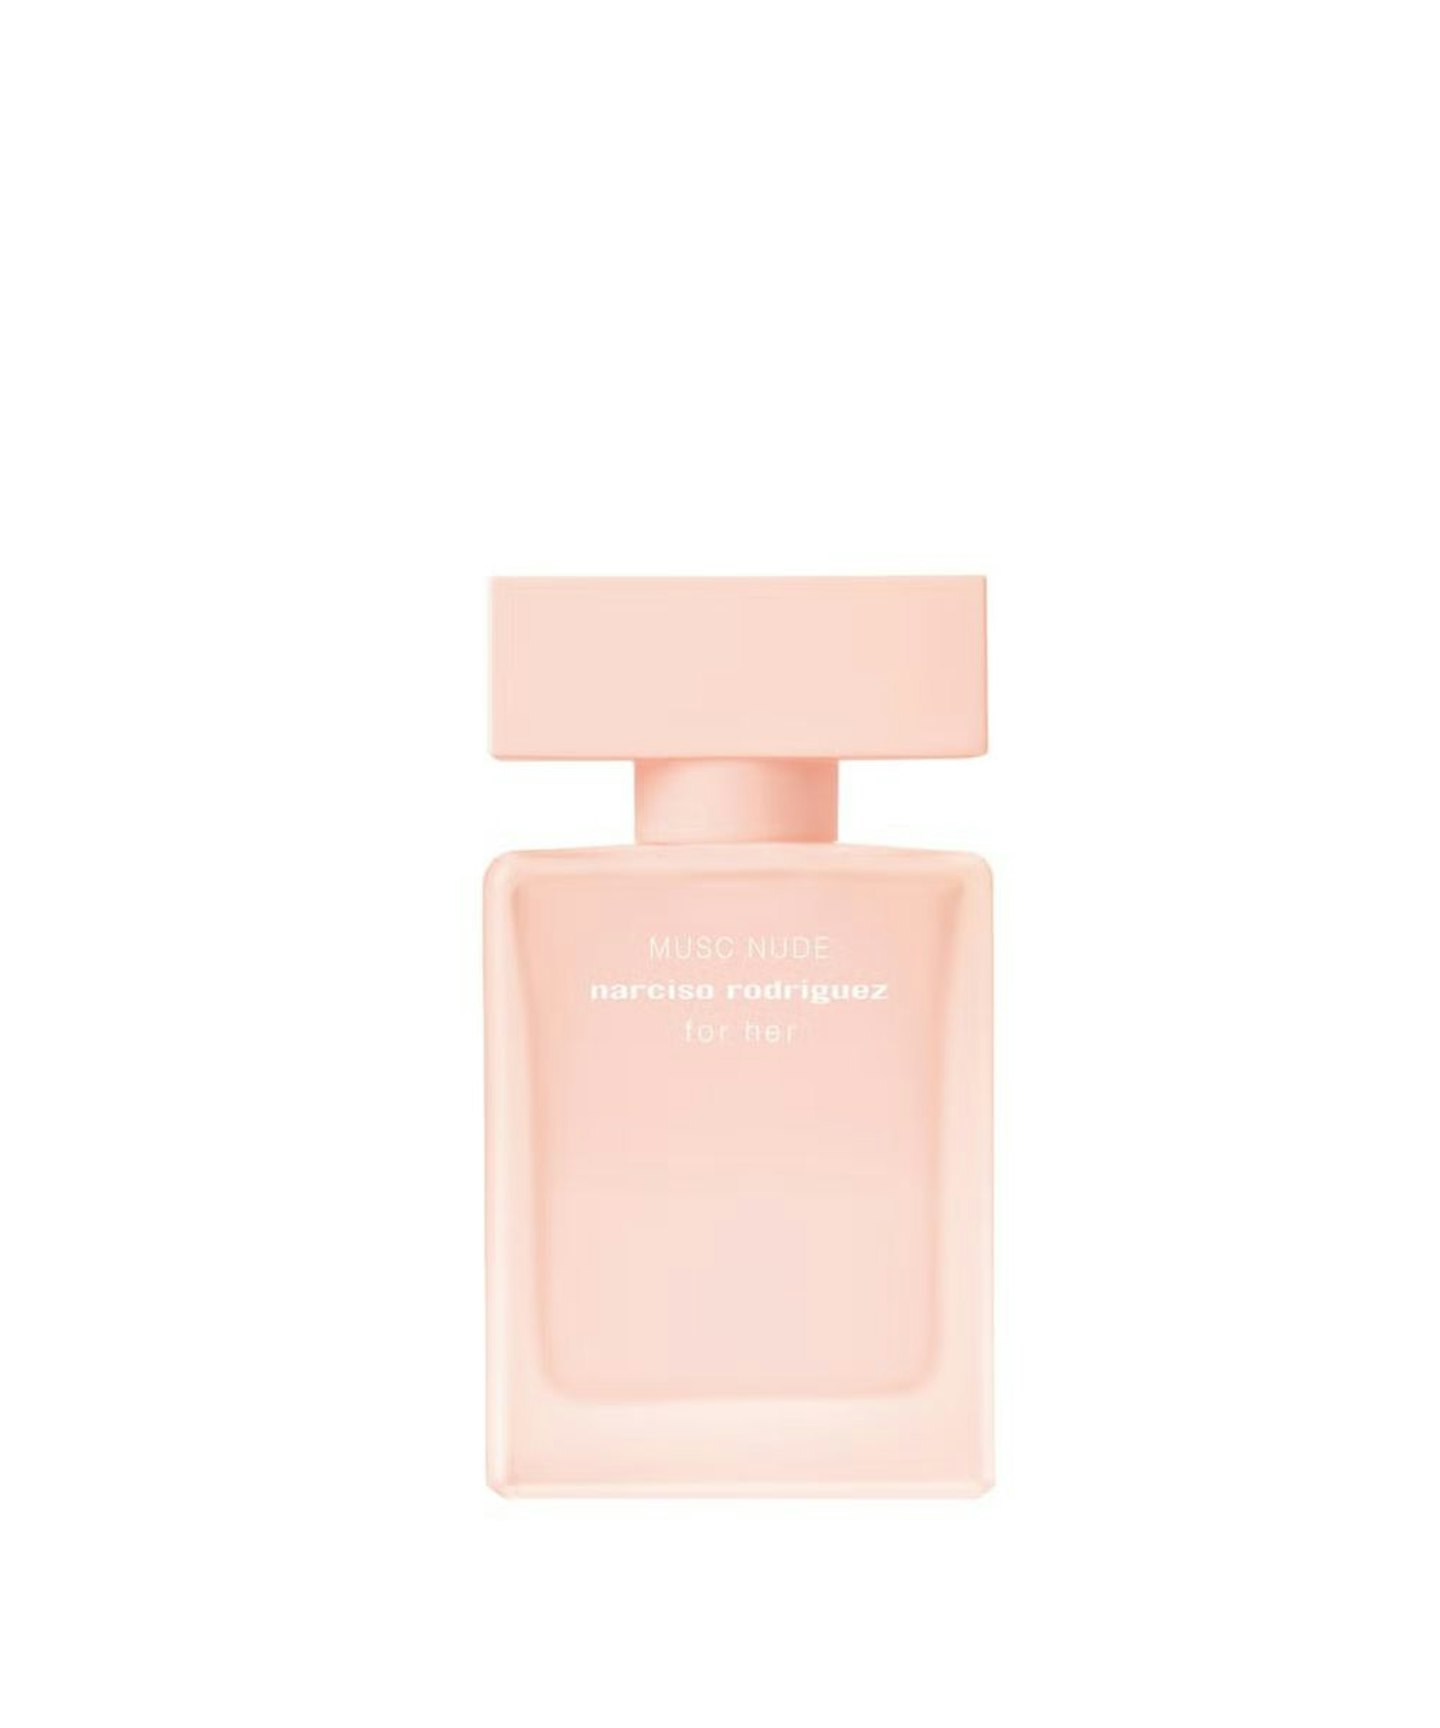 The Brand New Narciso Rodriguez Fragrance Is Finally Here